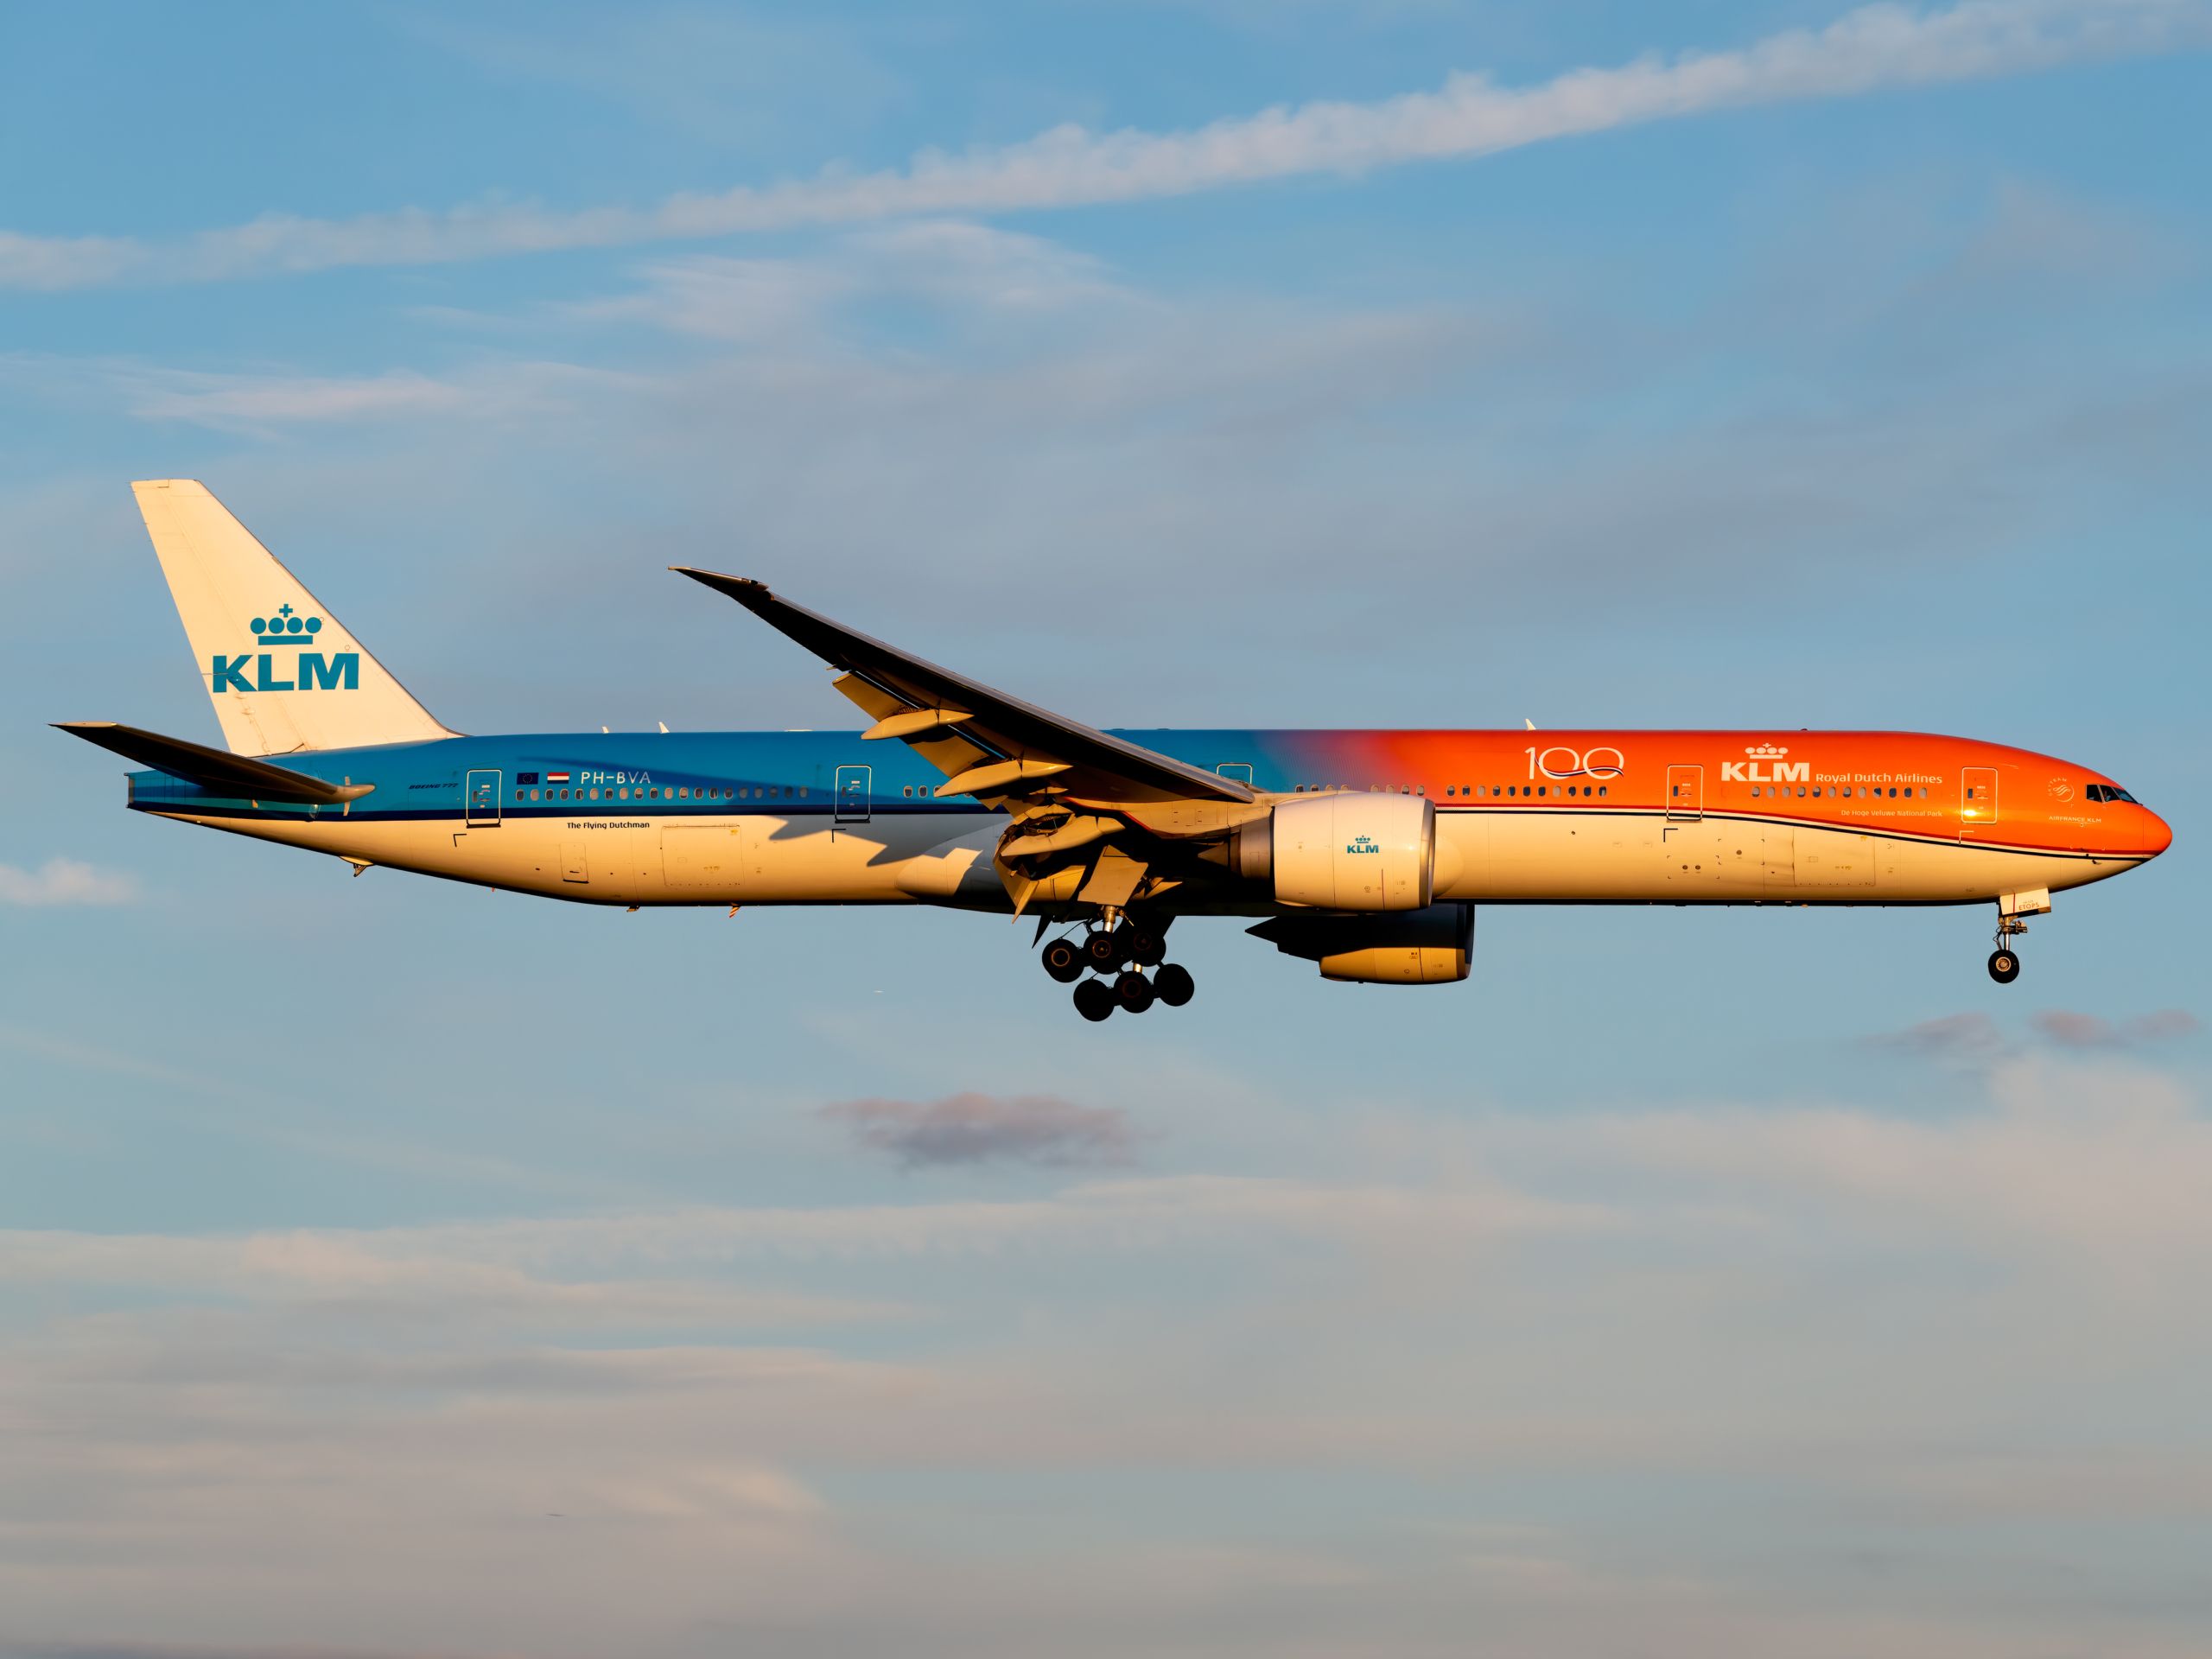 102 Years Of KLM The Airline's History